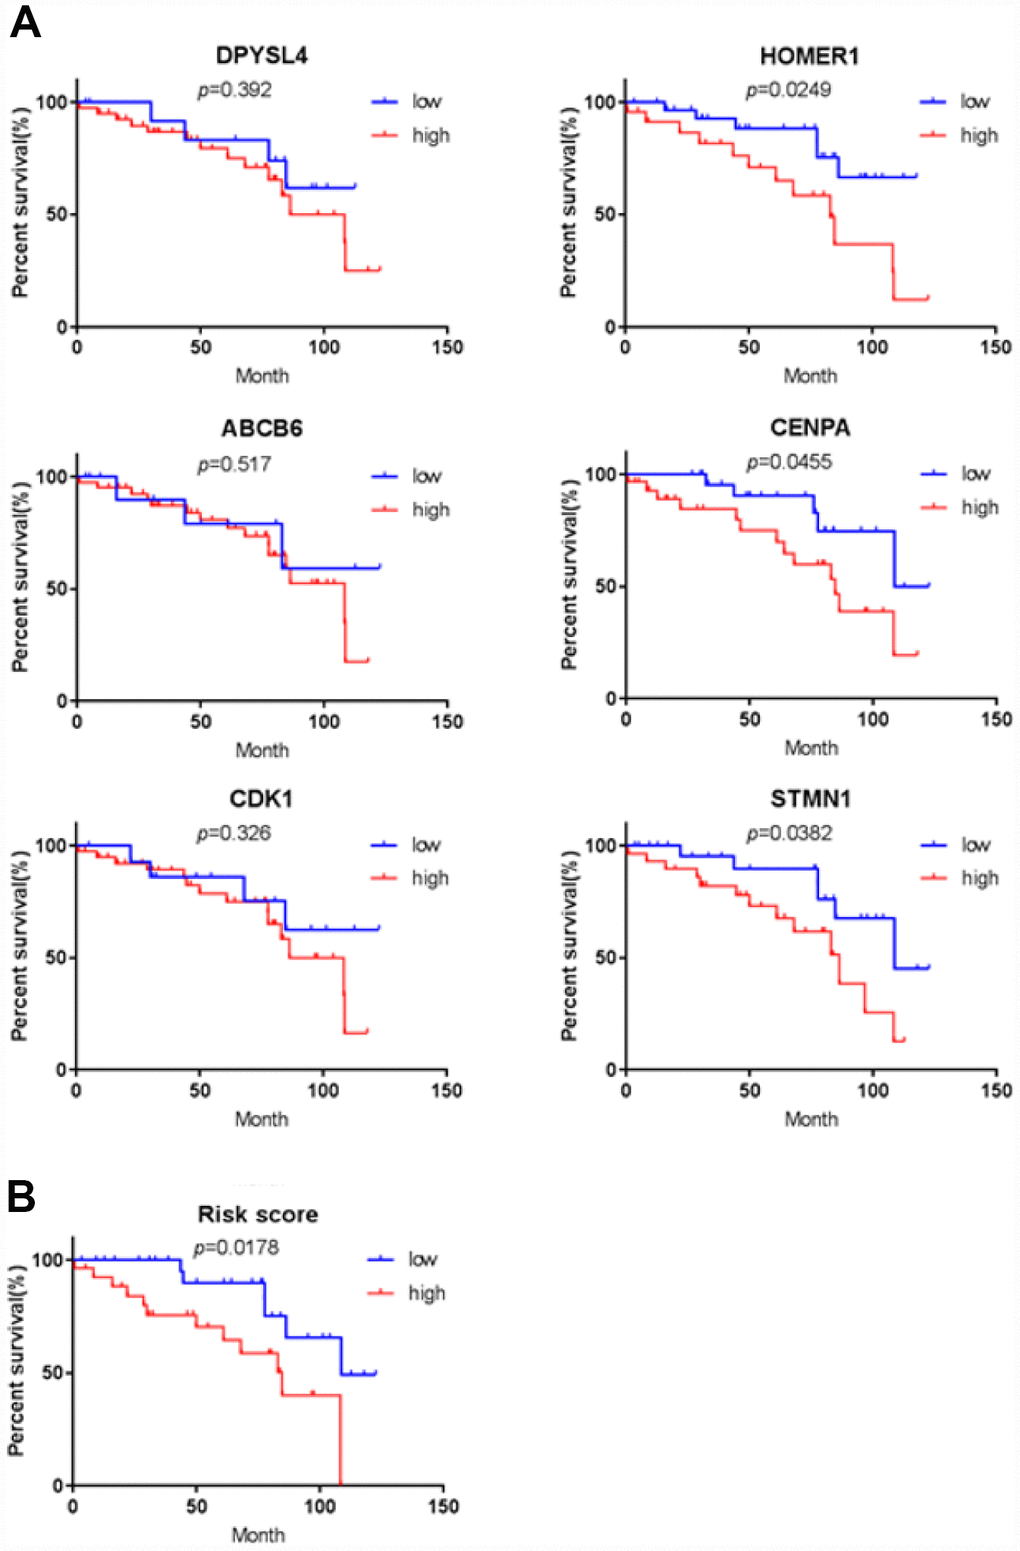 Validation for prognostic value of six proteins and risk signature. (A) K-M curves for DPYSL4, HOMER1, ABCB6, CENPA, CDK1 and STMN1, (B) K-M curves for risk score.